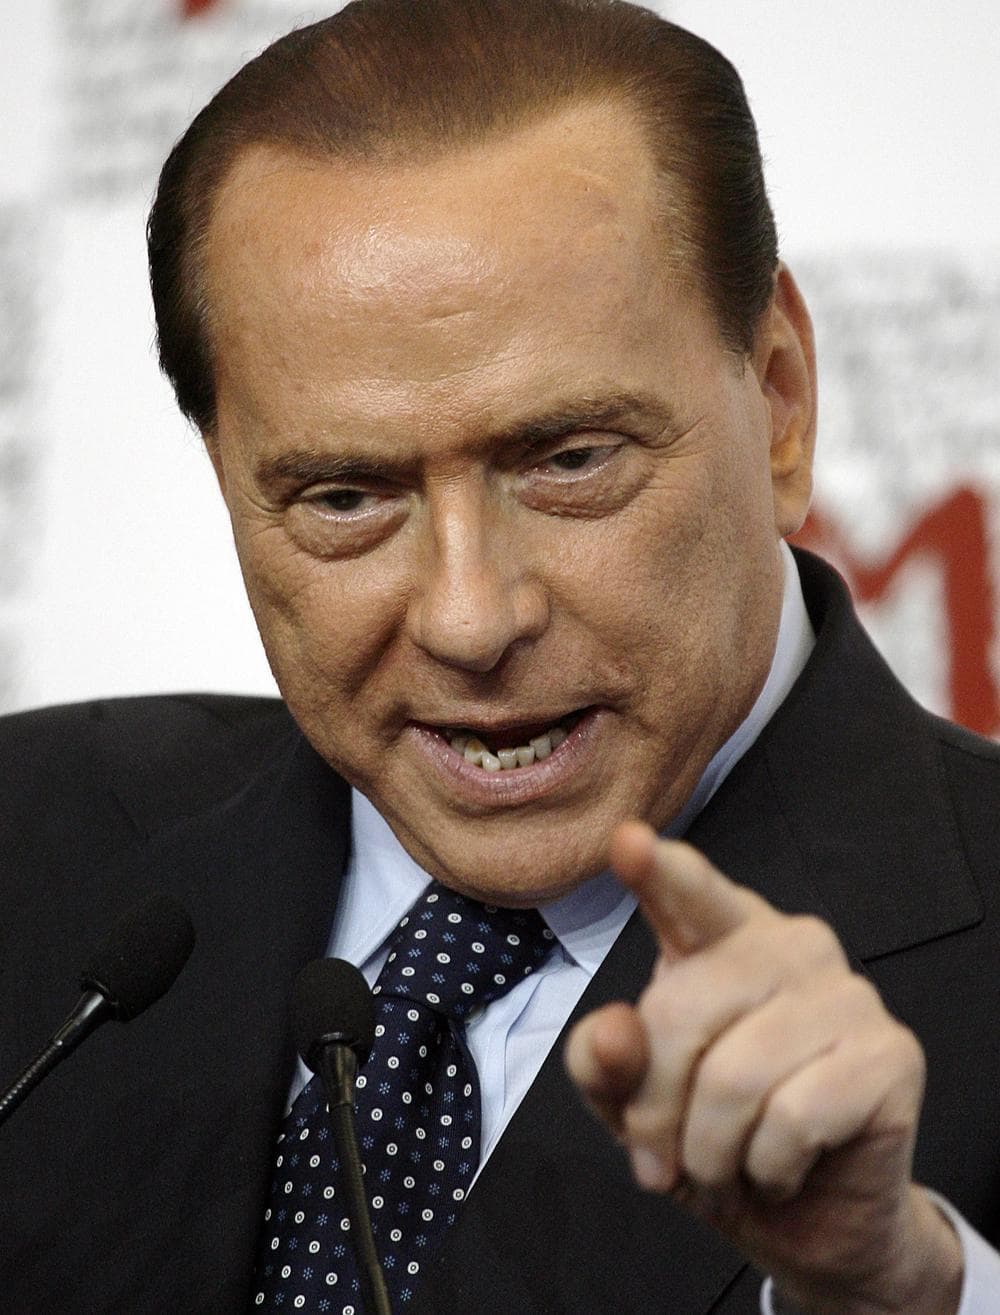 FILE - In this Sept. 8, 2009 file photo Italian premier Silvio Berlusconi gestures at the opening of a textile industry fair in Milan, Italy. Italian Silvio Berlusconi says he was &quot;astounded&quot; by a court ruling ordering his Fininvest holding company to pay ?750 million ($1 billion) to a rival for its controversial 1990s takeover of the Mondadori publishing house. The conservative premier and media mogul on Monday, Oct. 5, 2009 criticized last week's ruling and implied it was politically motivated. In a statement, he called the ruling &quot;a judicial absurdity&quot; and said he would continue as premier until the end of his five-year mandate. (AP)